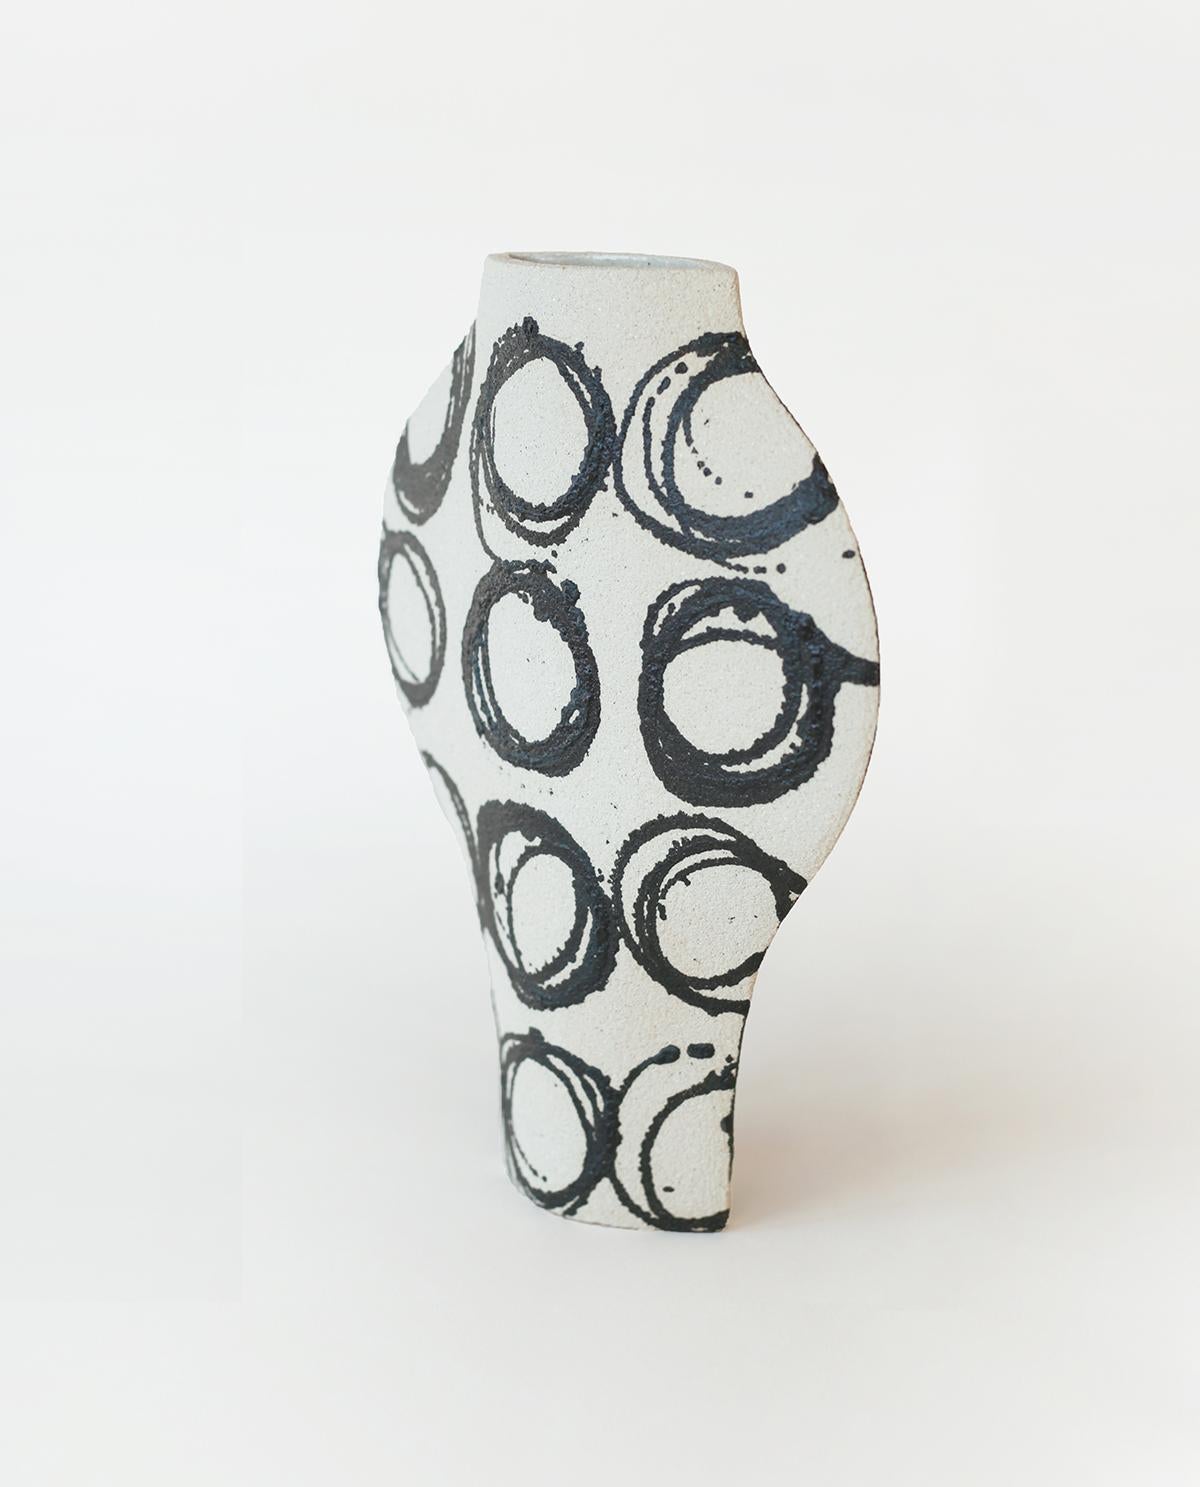 ‘Dripping Rounds' Handmade White Ceramic Vase

This vase is part of a new series inspired by iconic Art (and more precisely paintings) movements. Here is our DAL model with round motifs based on abstract paintings. They are applied to the vase